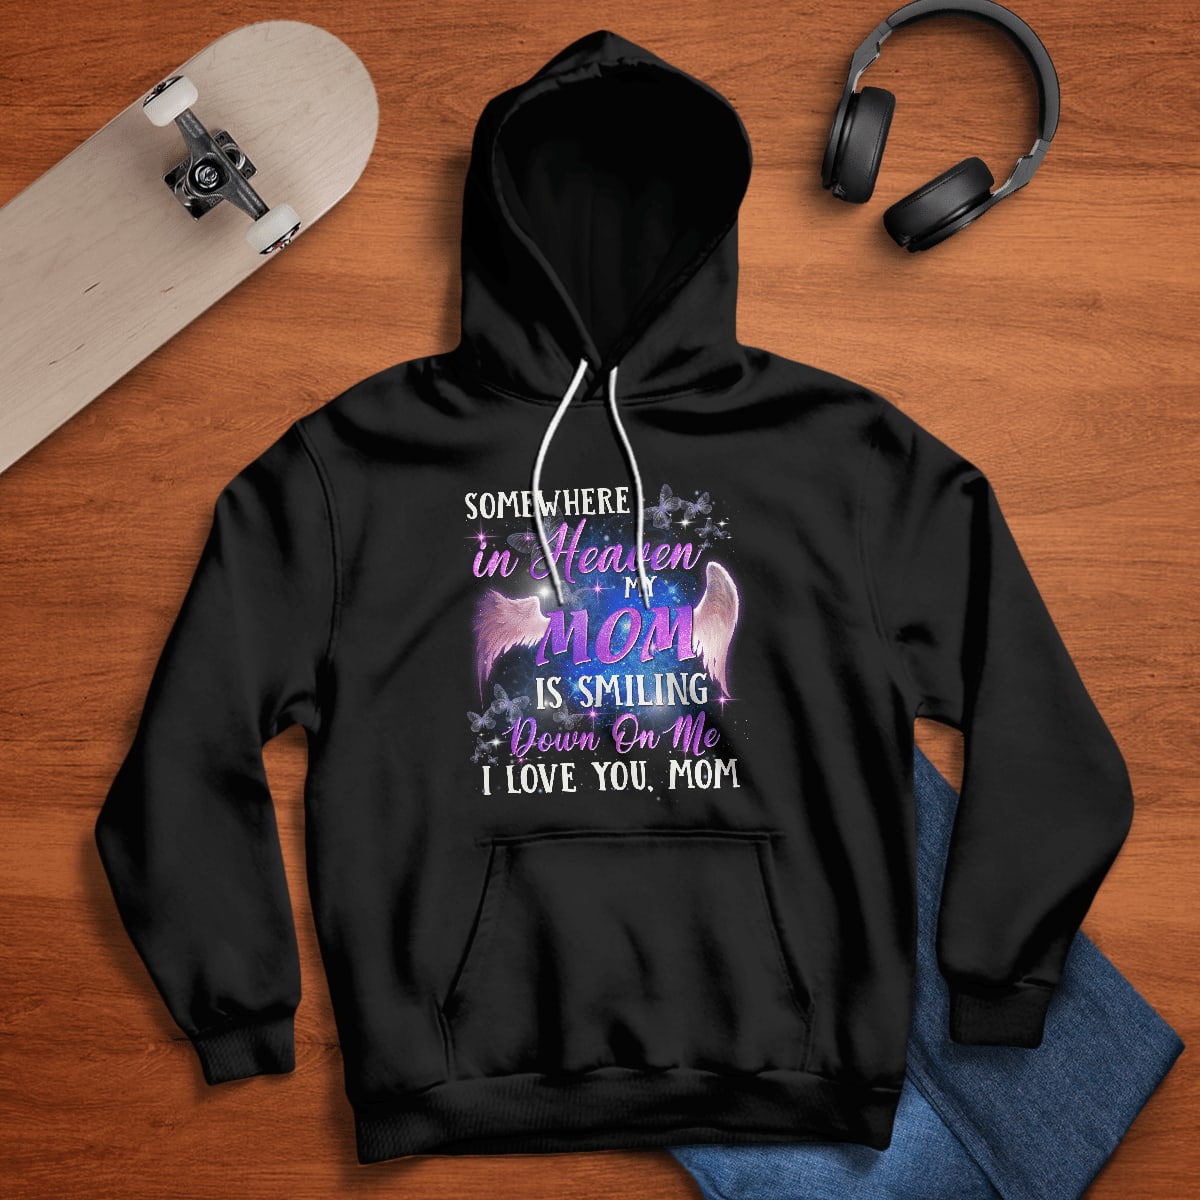 Somewhere In Heaven My Mom Is Smiling Down On Me I Love You, Mom T-Shirt